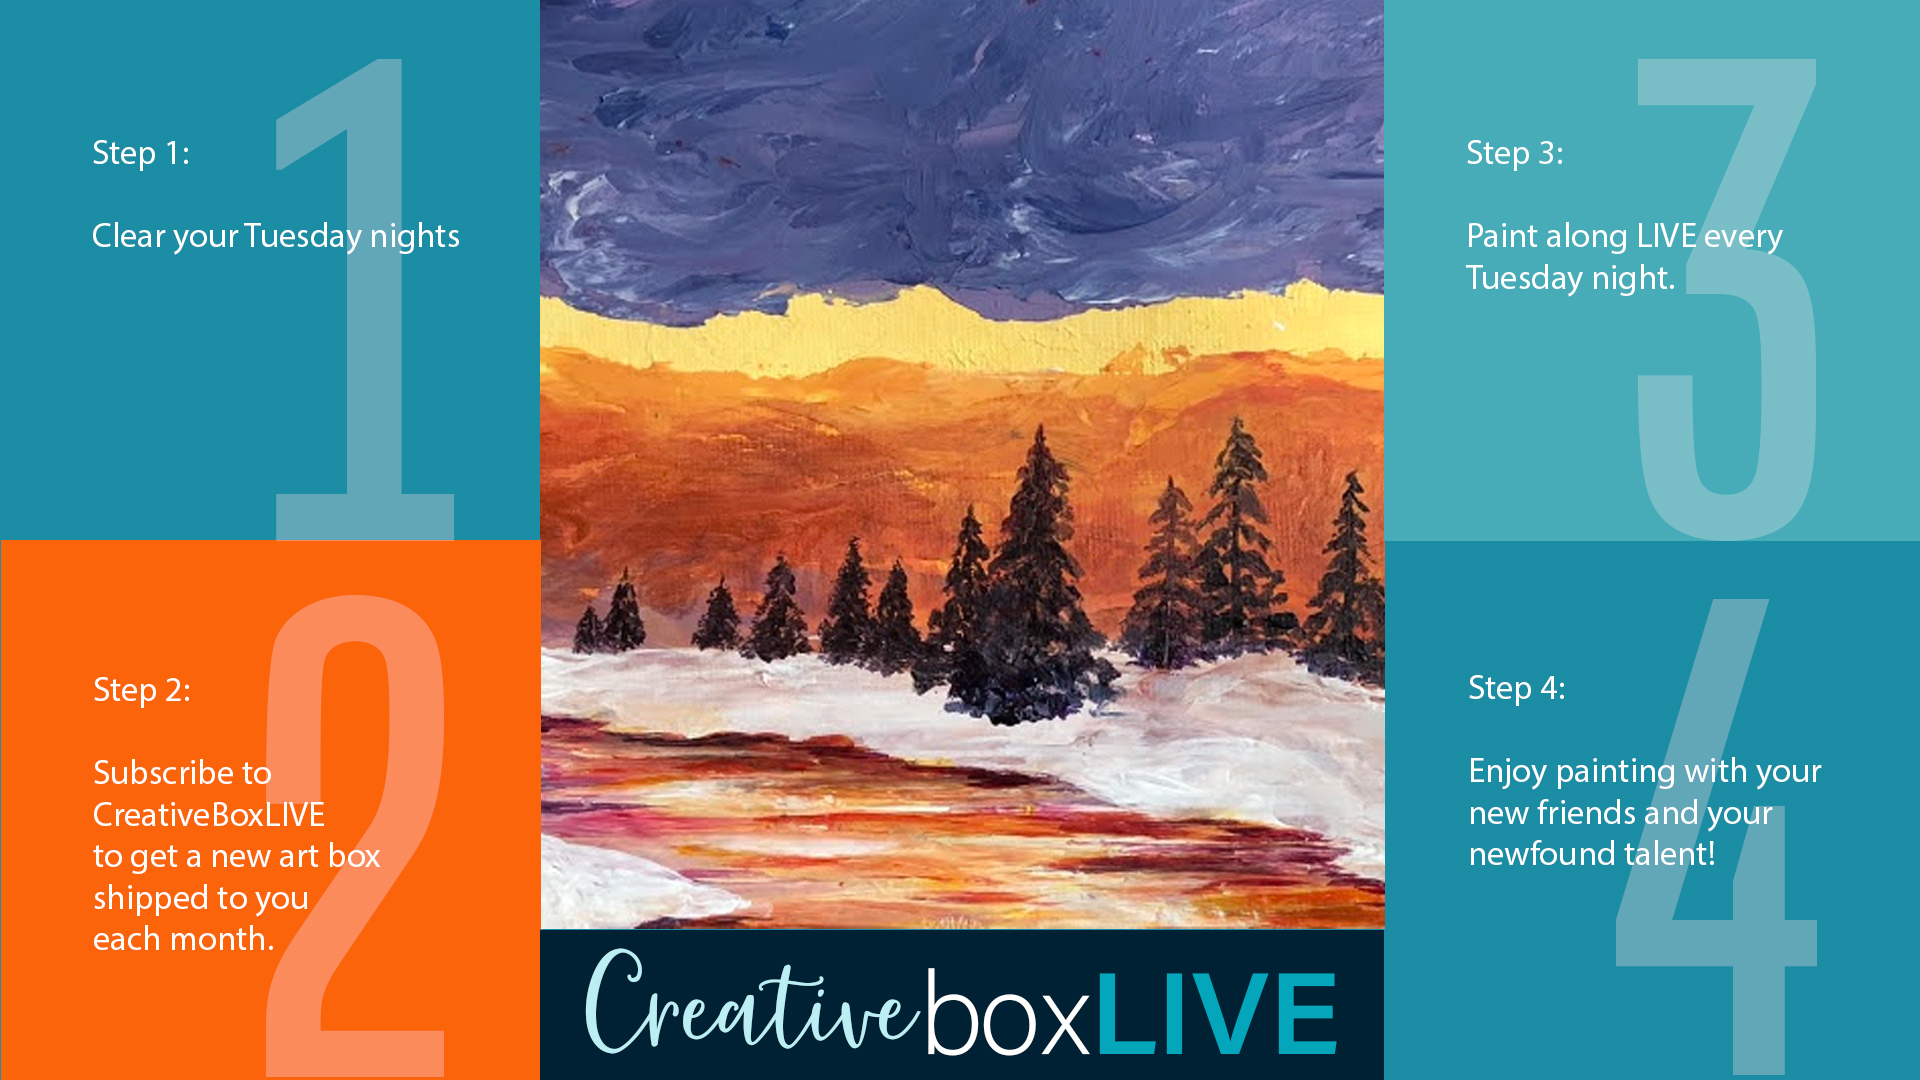 Firey Winter Sky CBL with CreativeBoxLIVE from Creatively Uncorked http://creativelyuncorked.com/